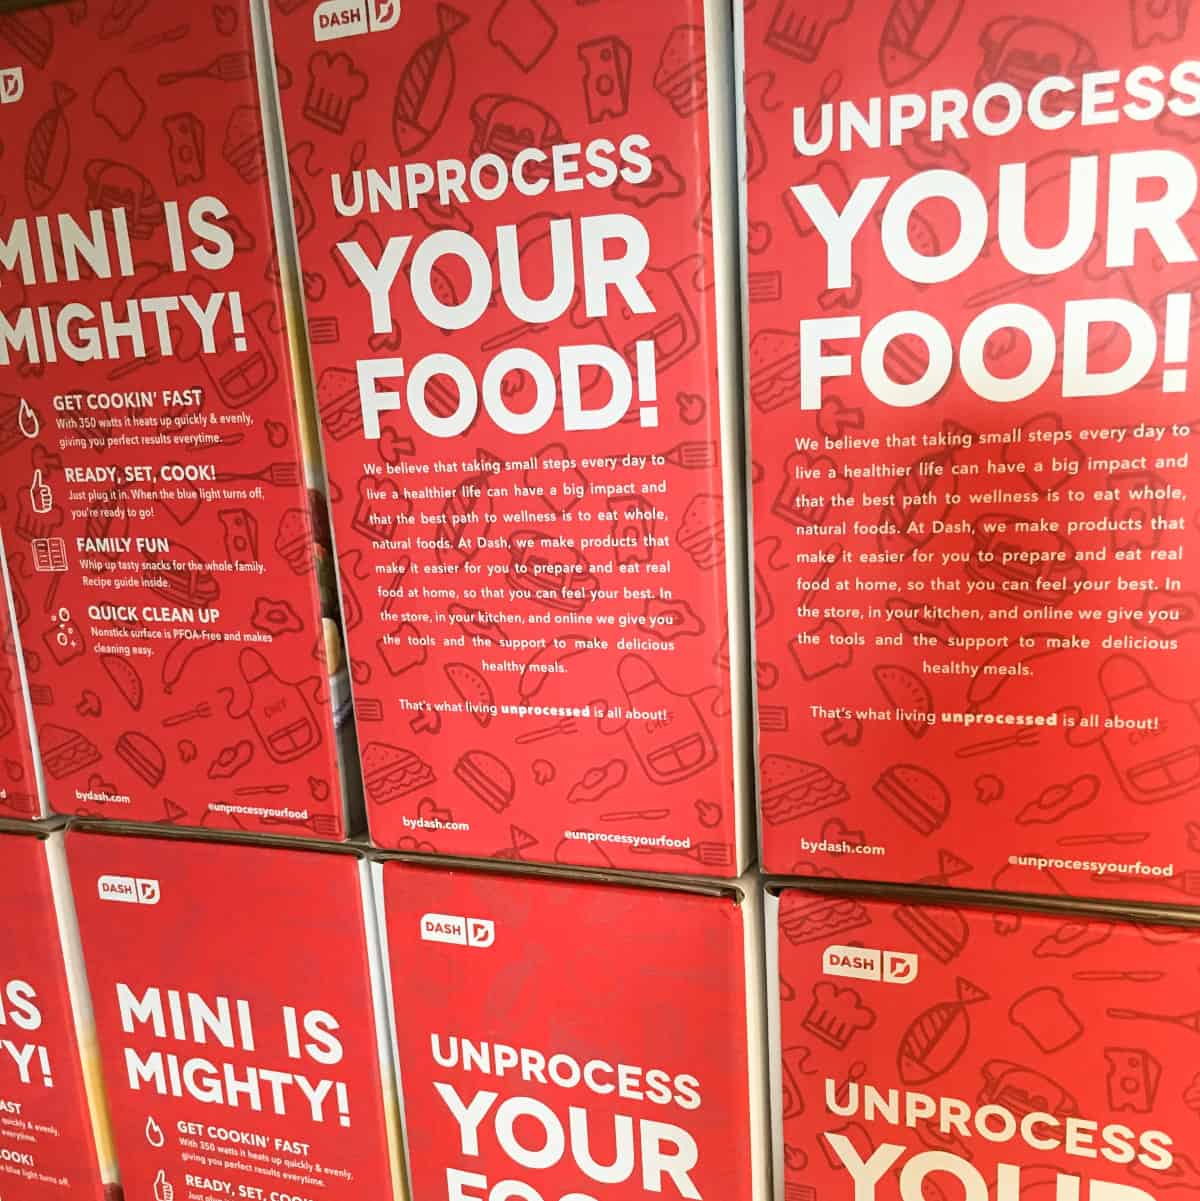 Stacked boxes of Dash Mini Waffle Makers. The words "Unprocess Your Food!" are repeated on the boxes.